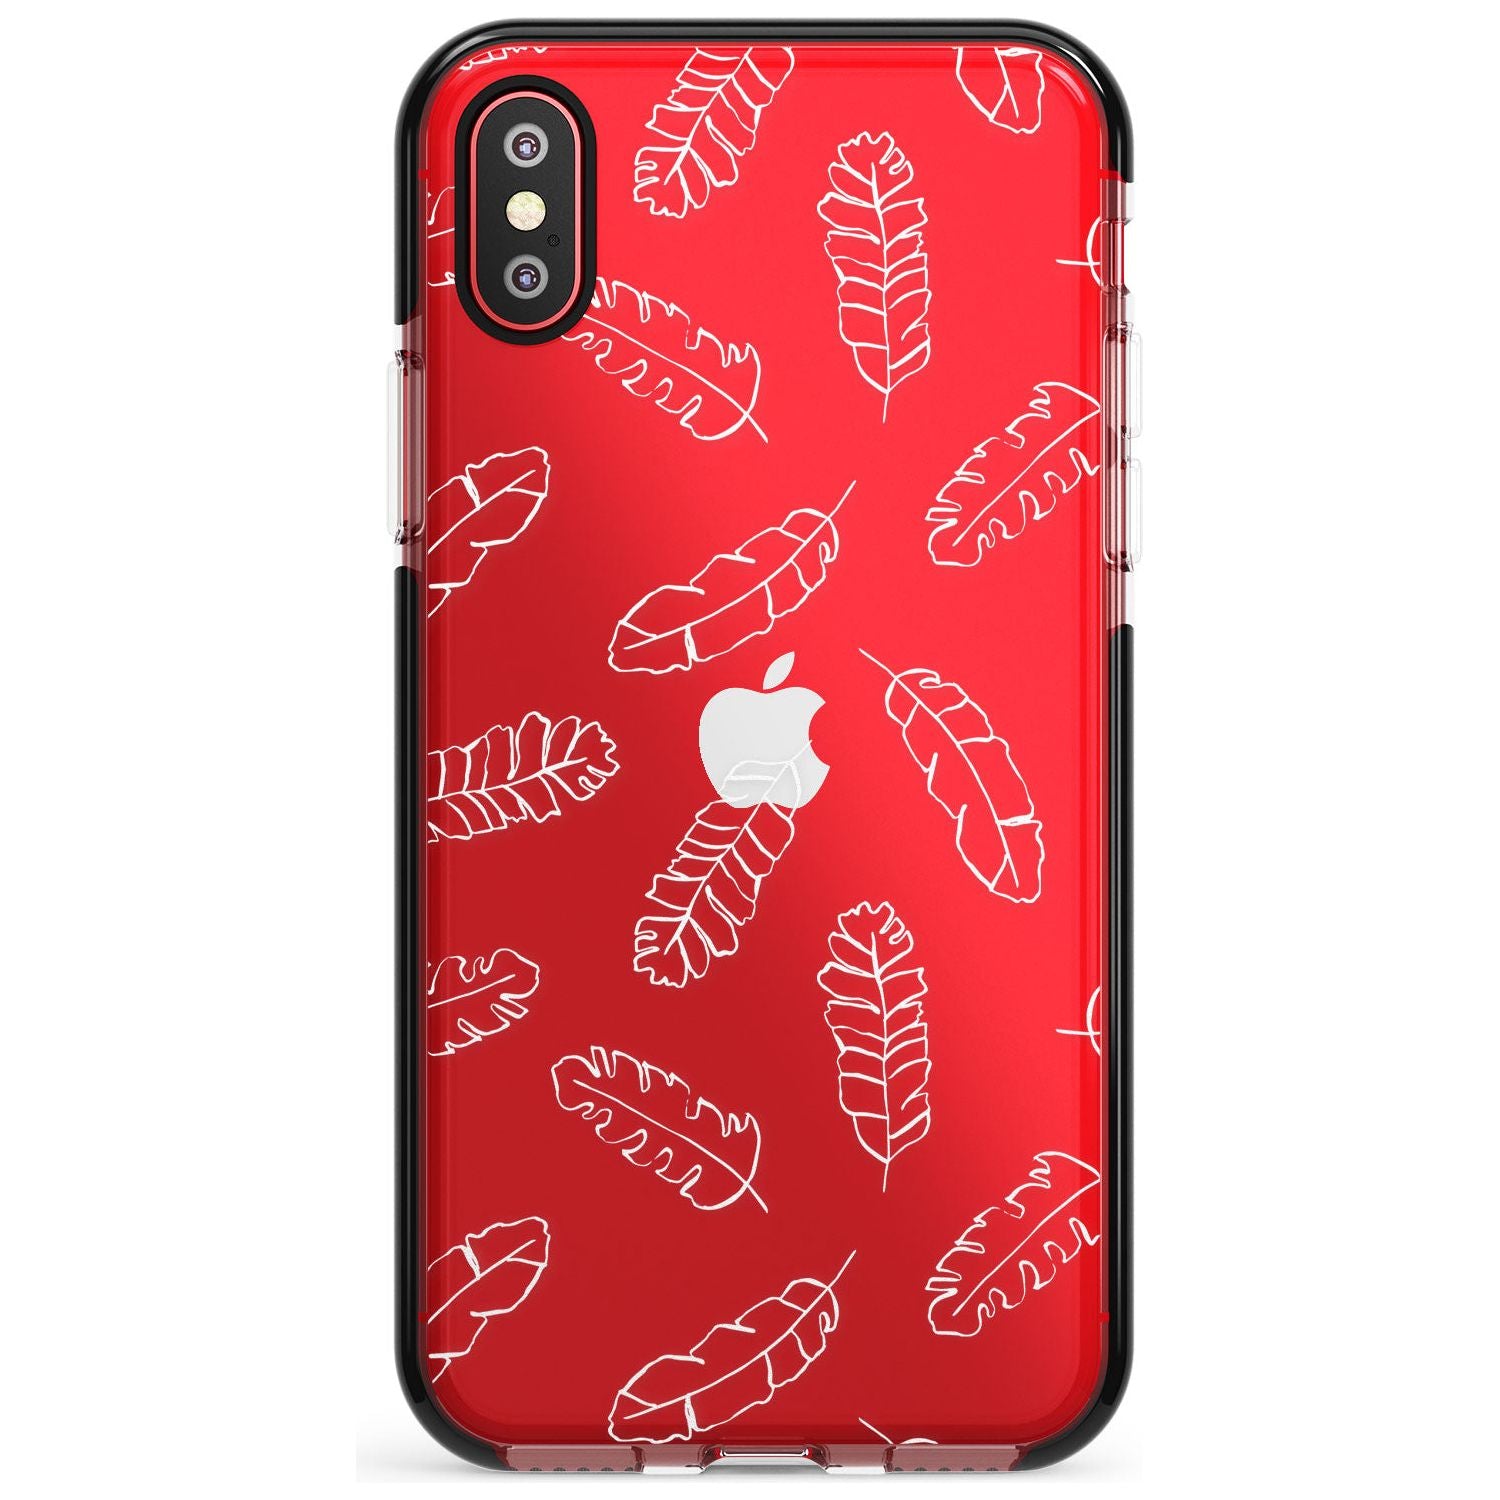 Clear Botanical Designs: Palm Leaves Pink Fade Impact Phone Case for iPhone X XS Max XR